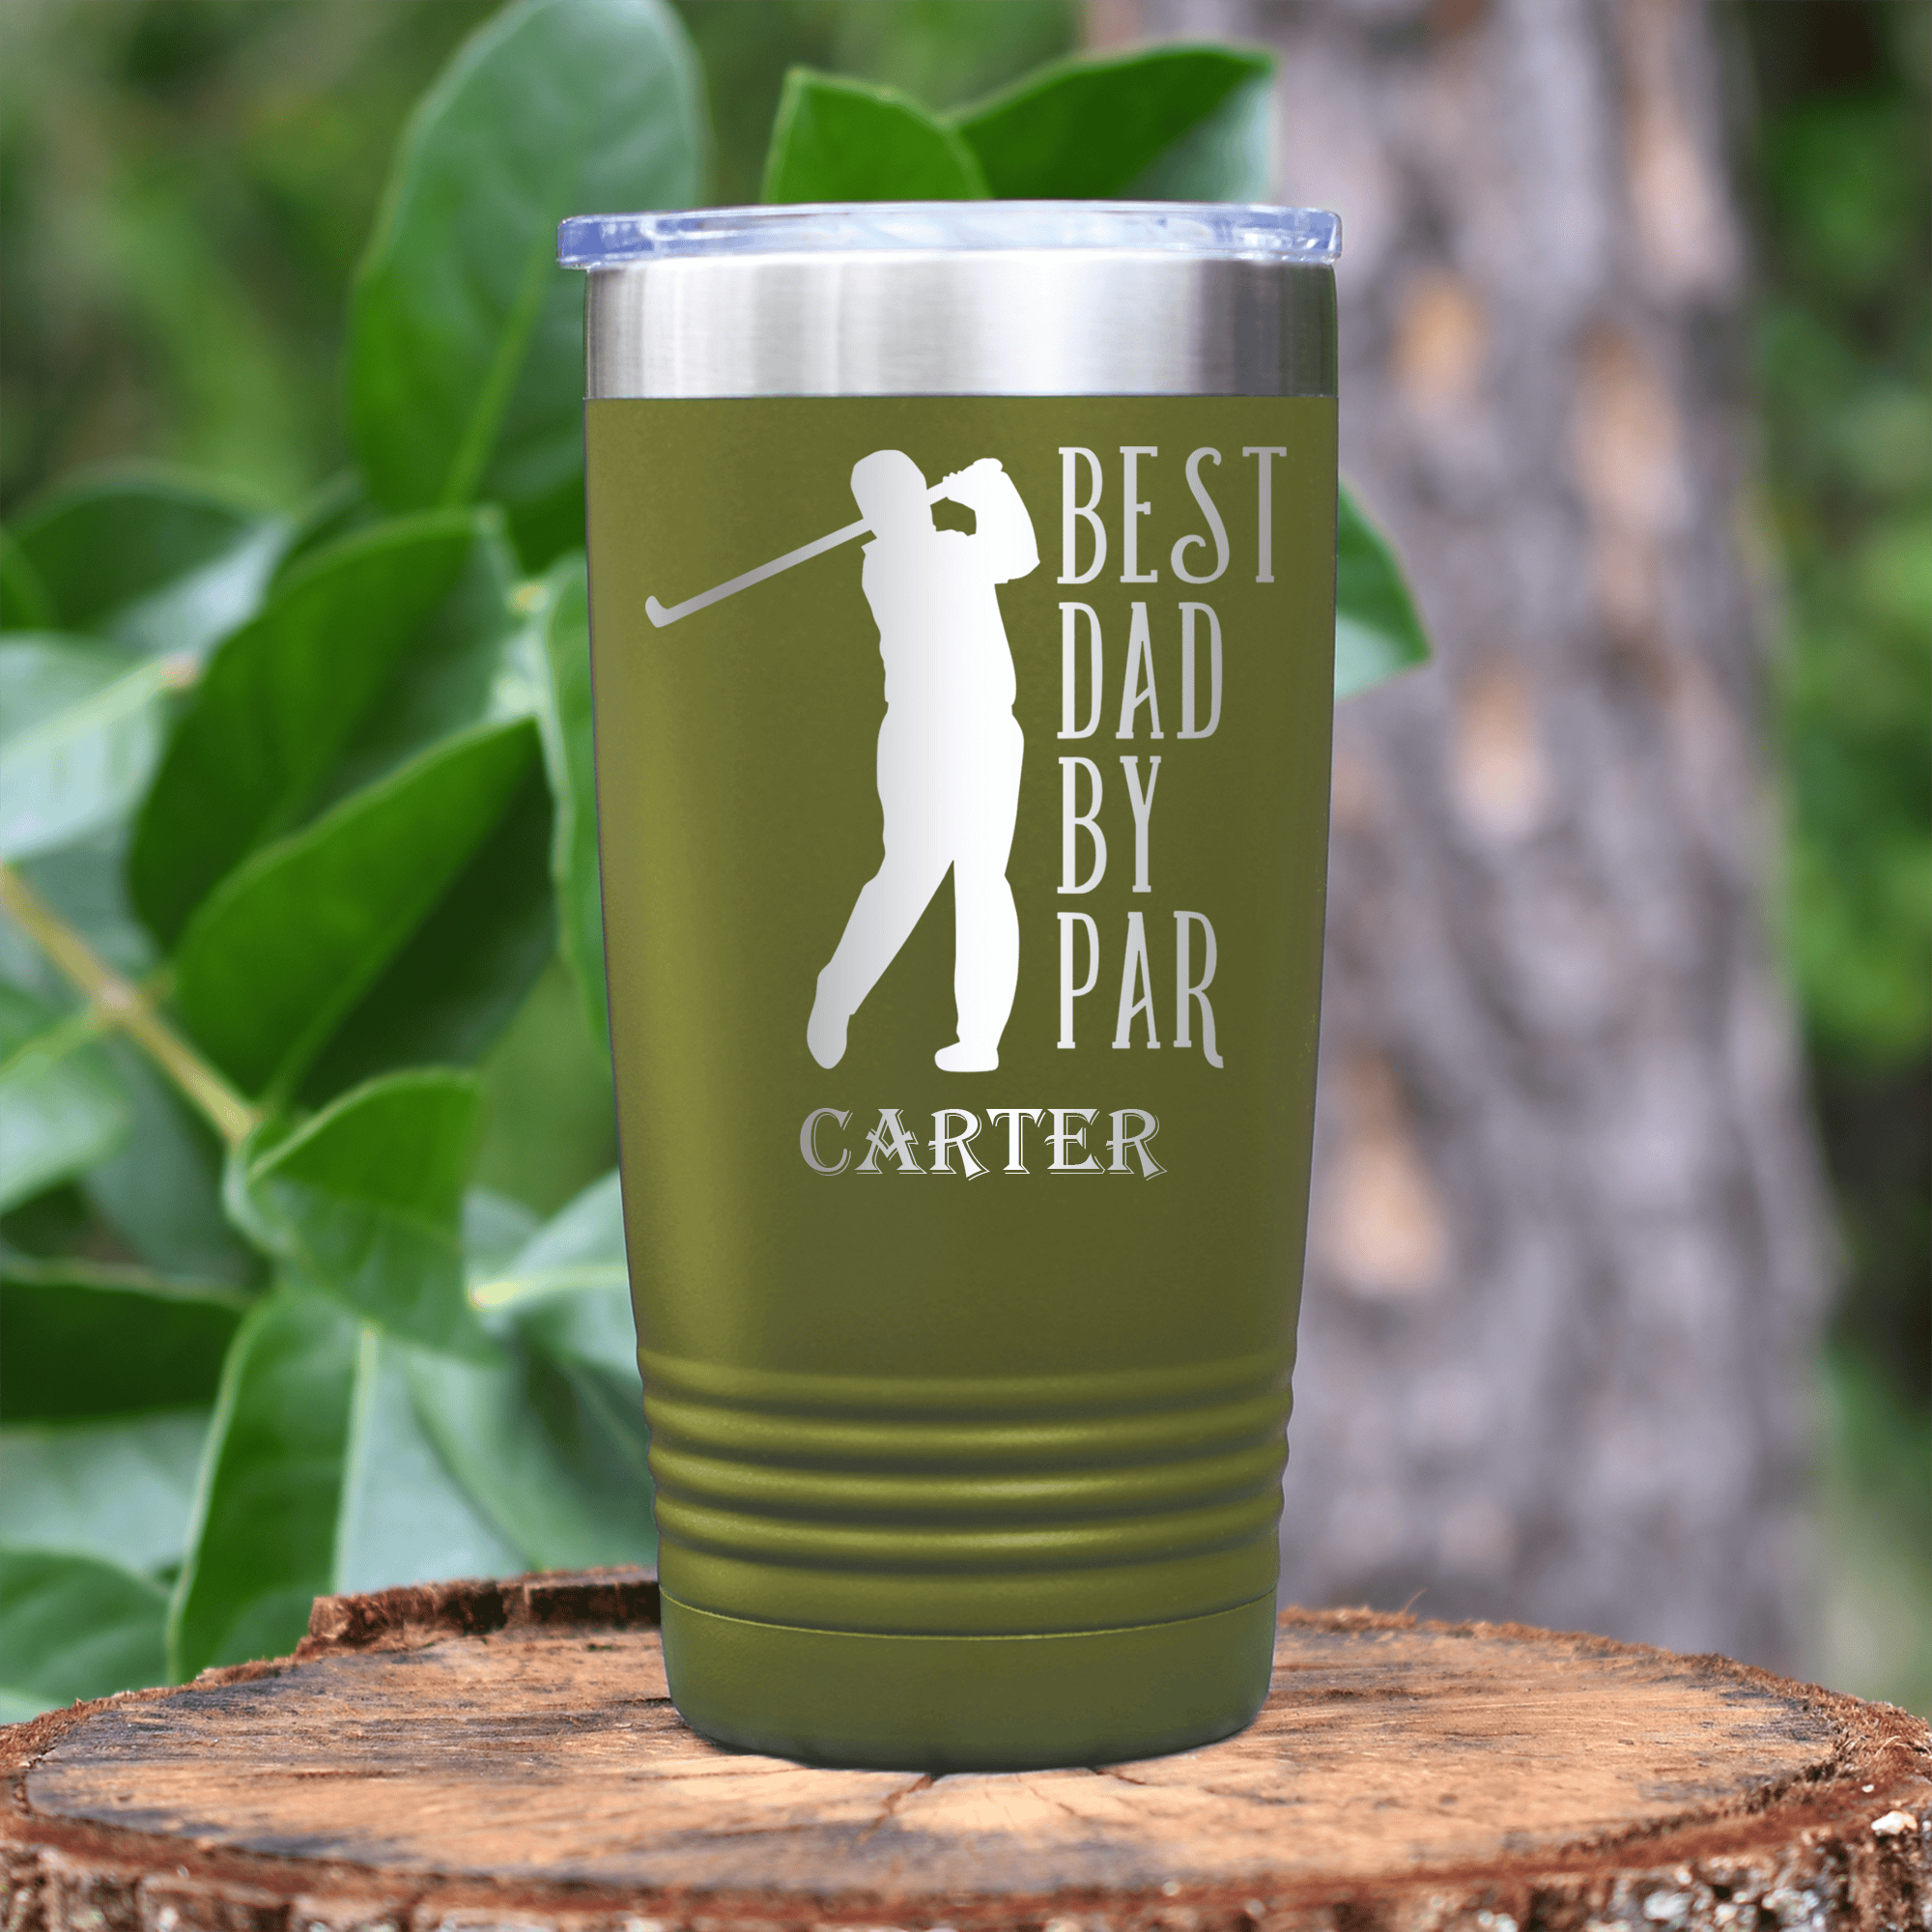 Military Green Golf Tumbler With Best Dad By Par Design